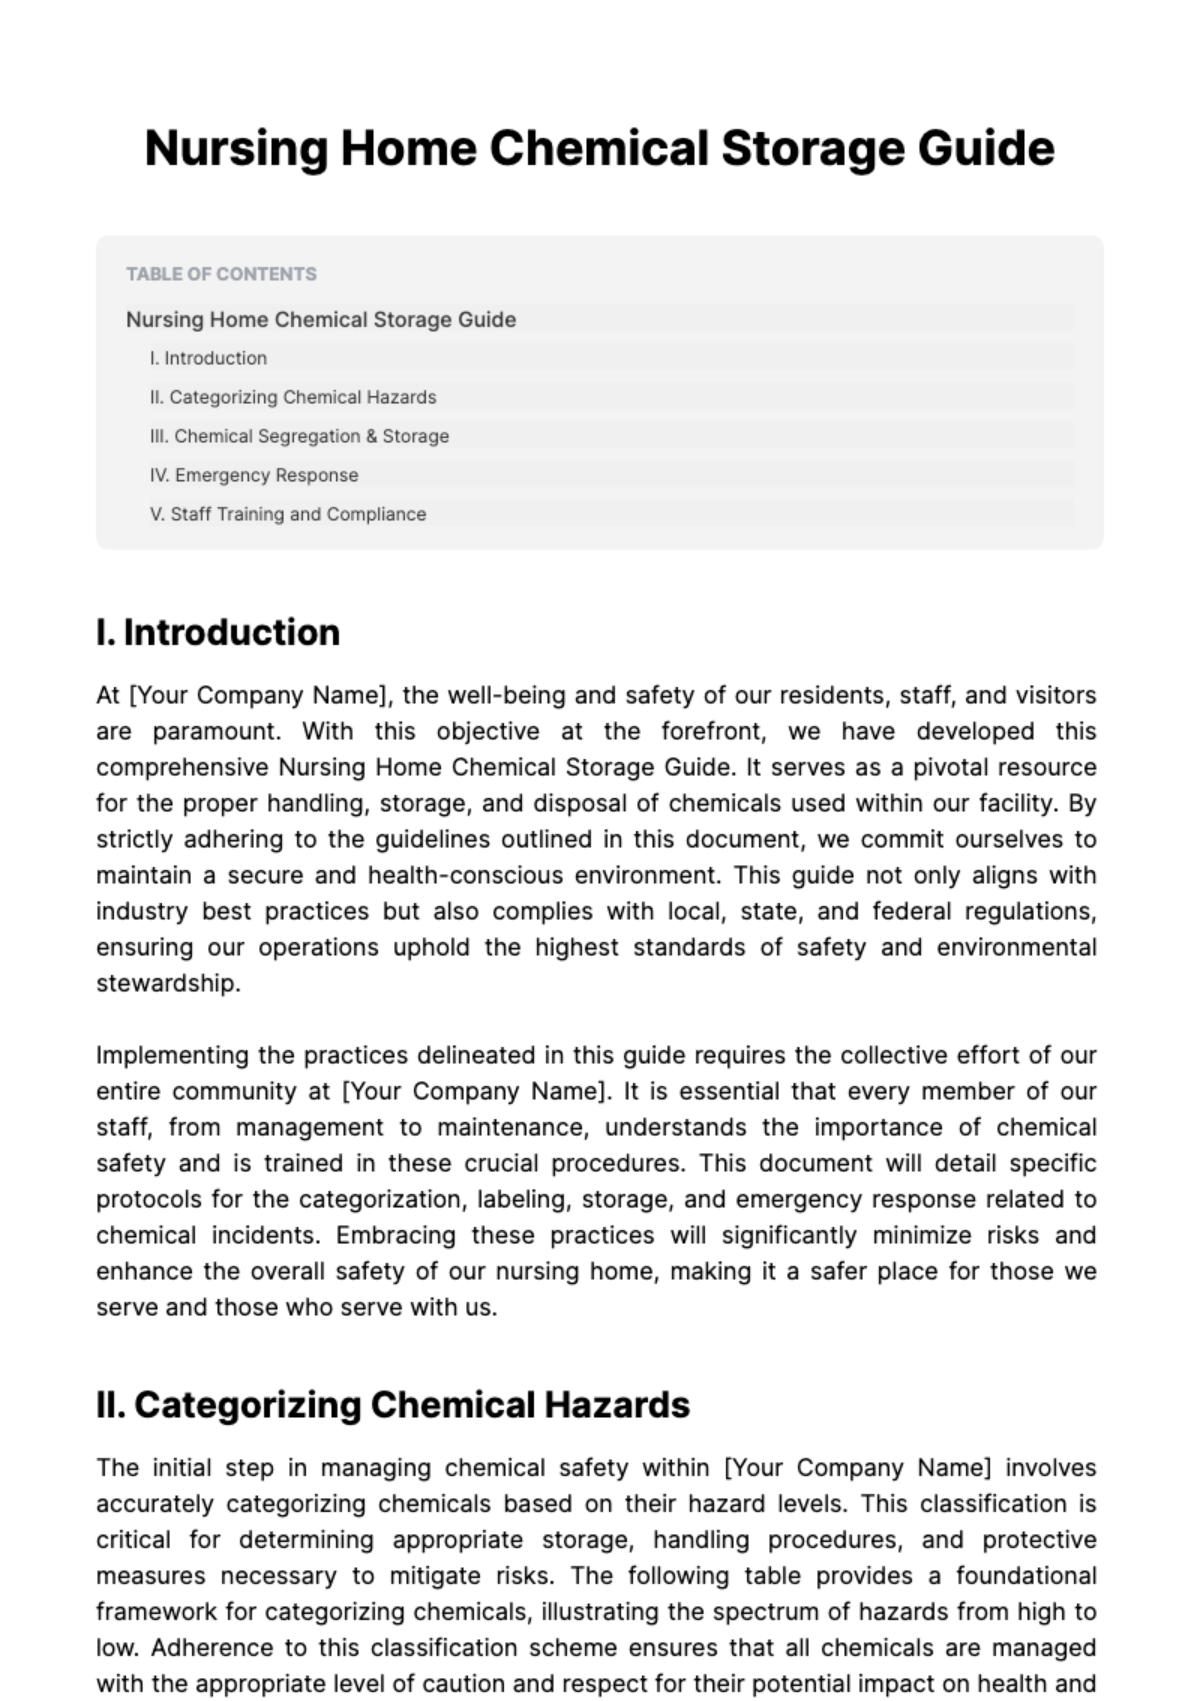 Free Nursing Home Chemical Storage Guide Template